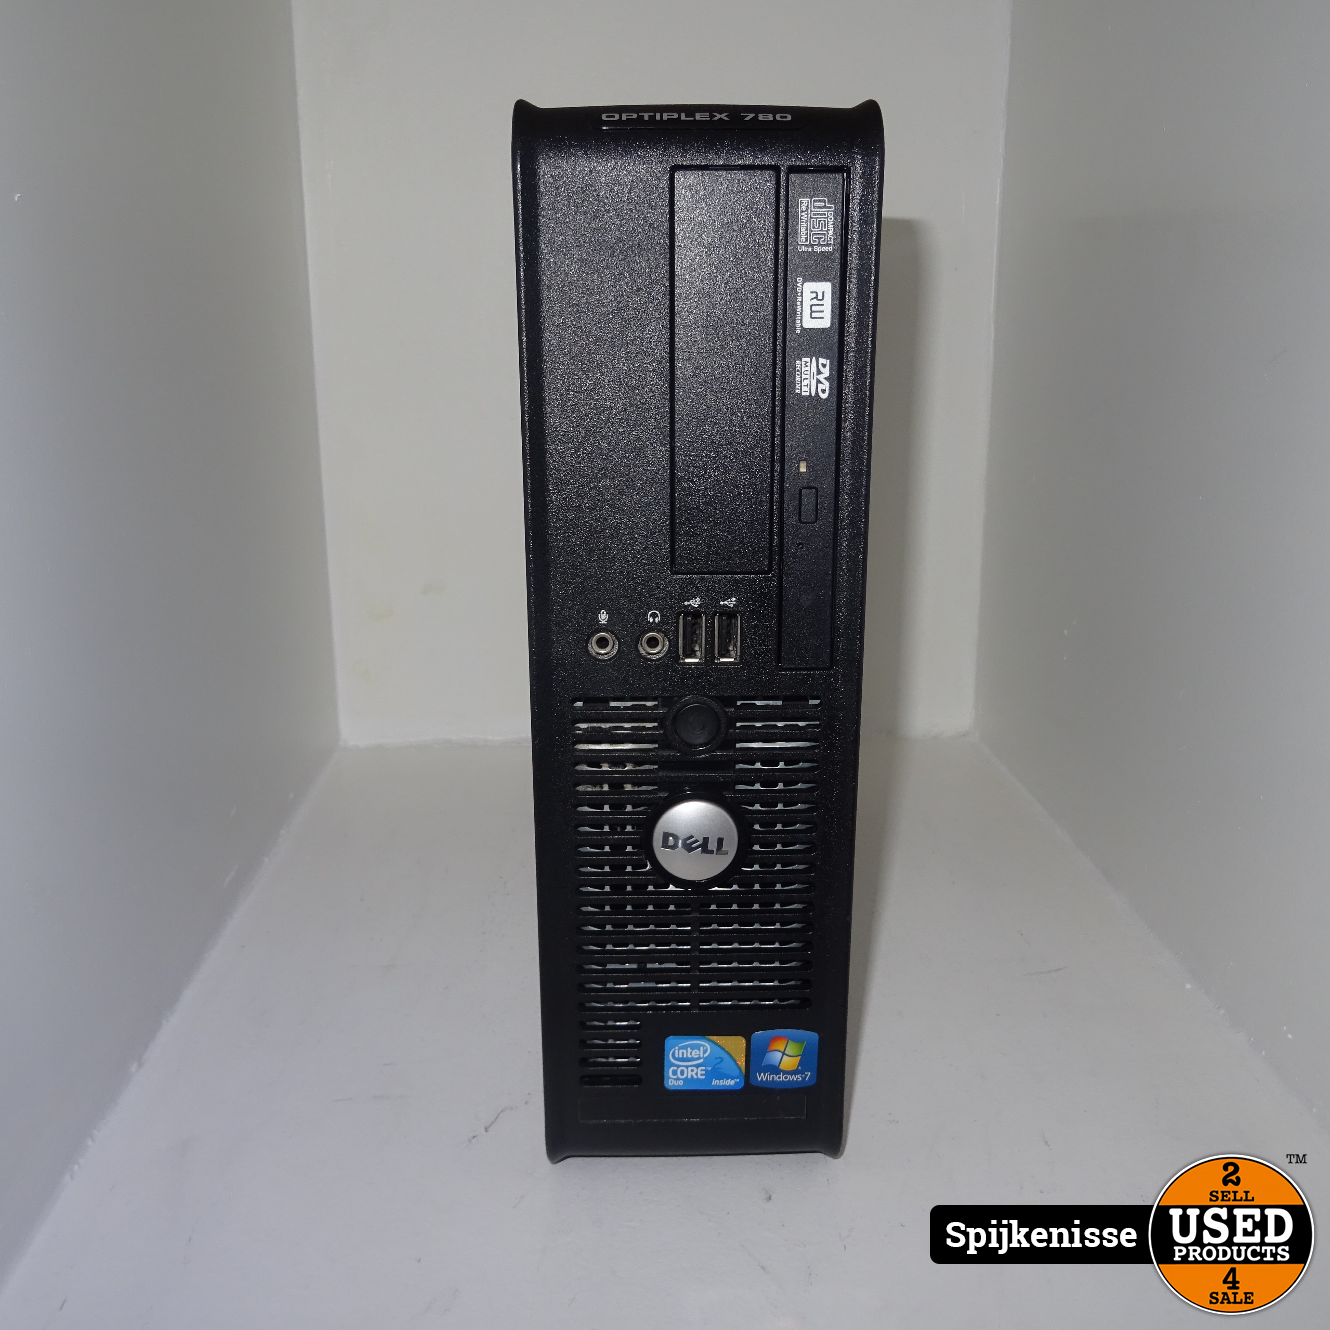 Dell Optiplex 780 Computer Used Products Spijkenisse